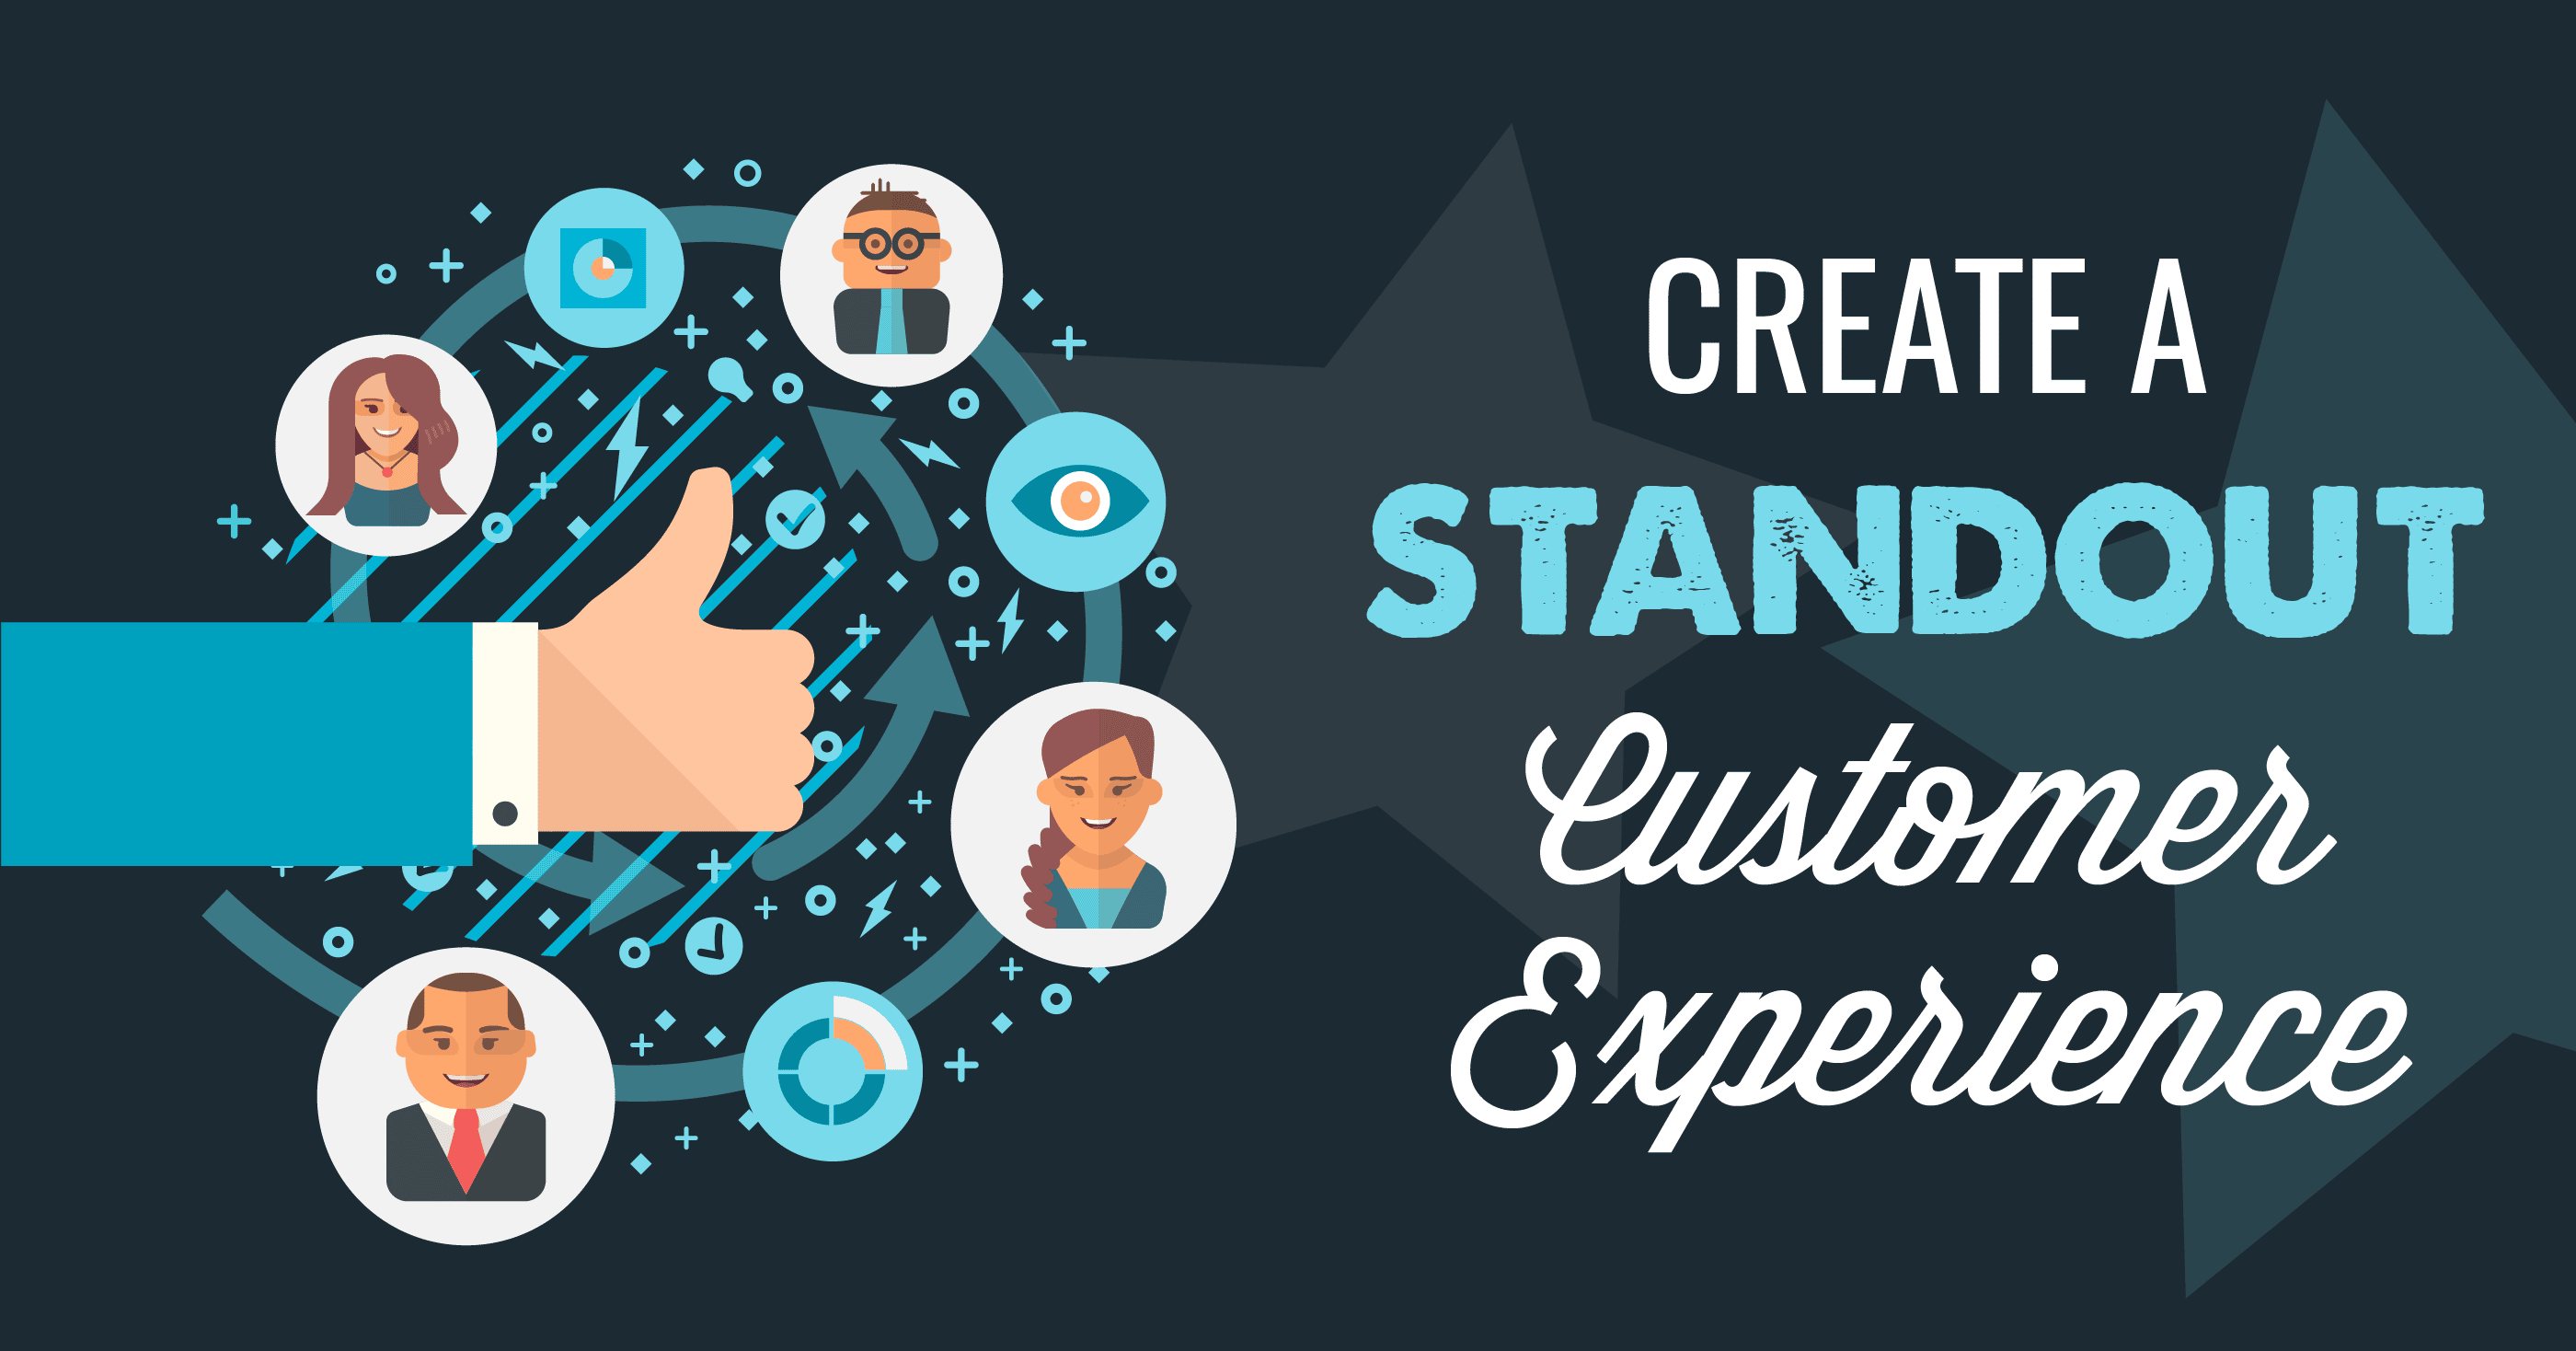 Create a Standout Customer Experience